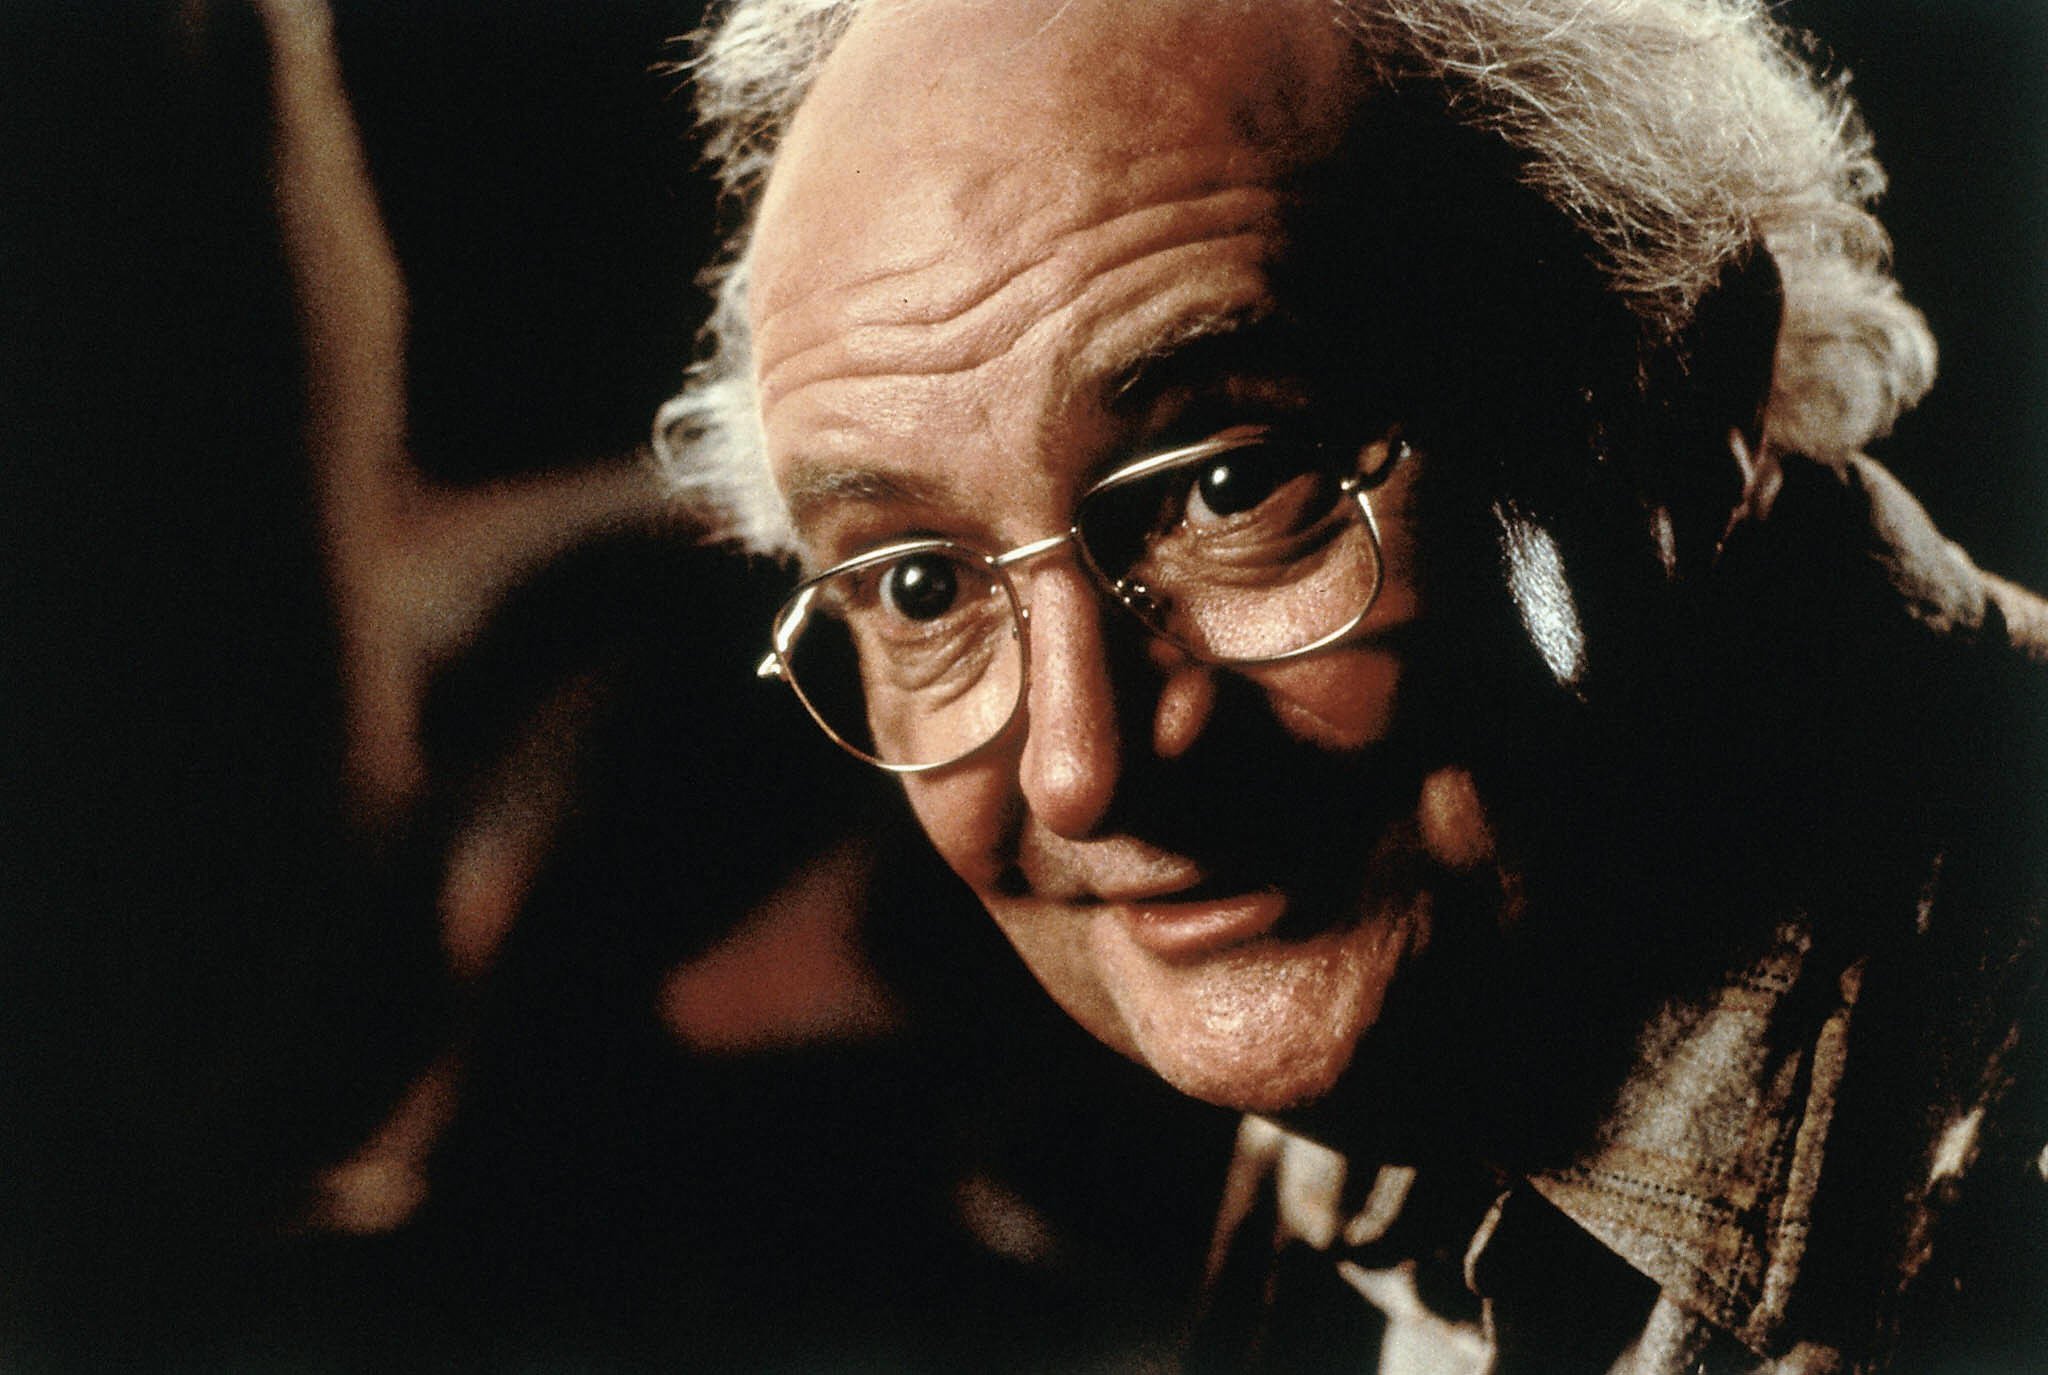 British actor Jim Broadbent is shown in a scene from the film "Iris," for which he was nominated for Outstanding Performance by a Male Actor in a Supporting Role at the 8th Annual Screen Actors Guild Awards Nominations, in Los Angeles, CA, 29 January 2002.  The Awards will be presented in Los Angeles 10 March 2002.  AFP PHOTO/SAG [PNG Merlin Archive] ORG XMIT: POS2014031909134325